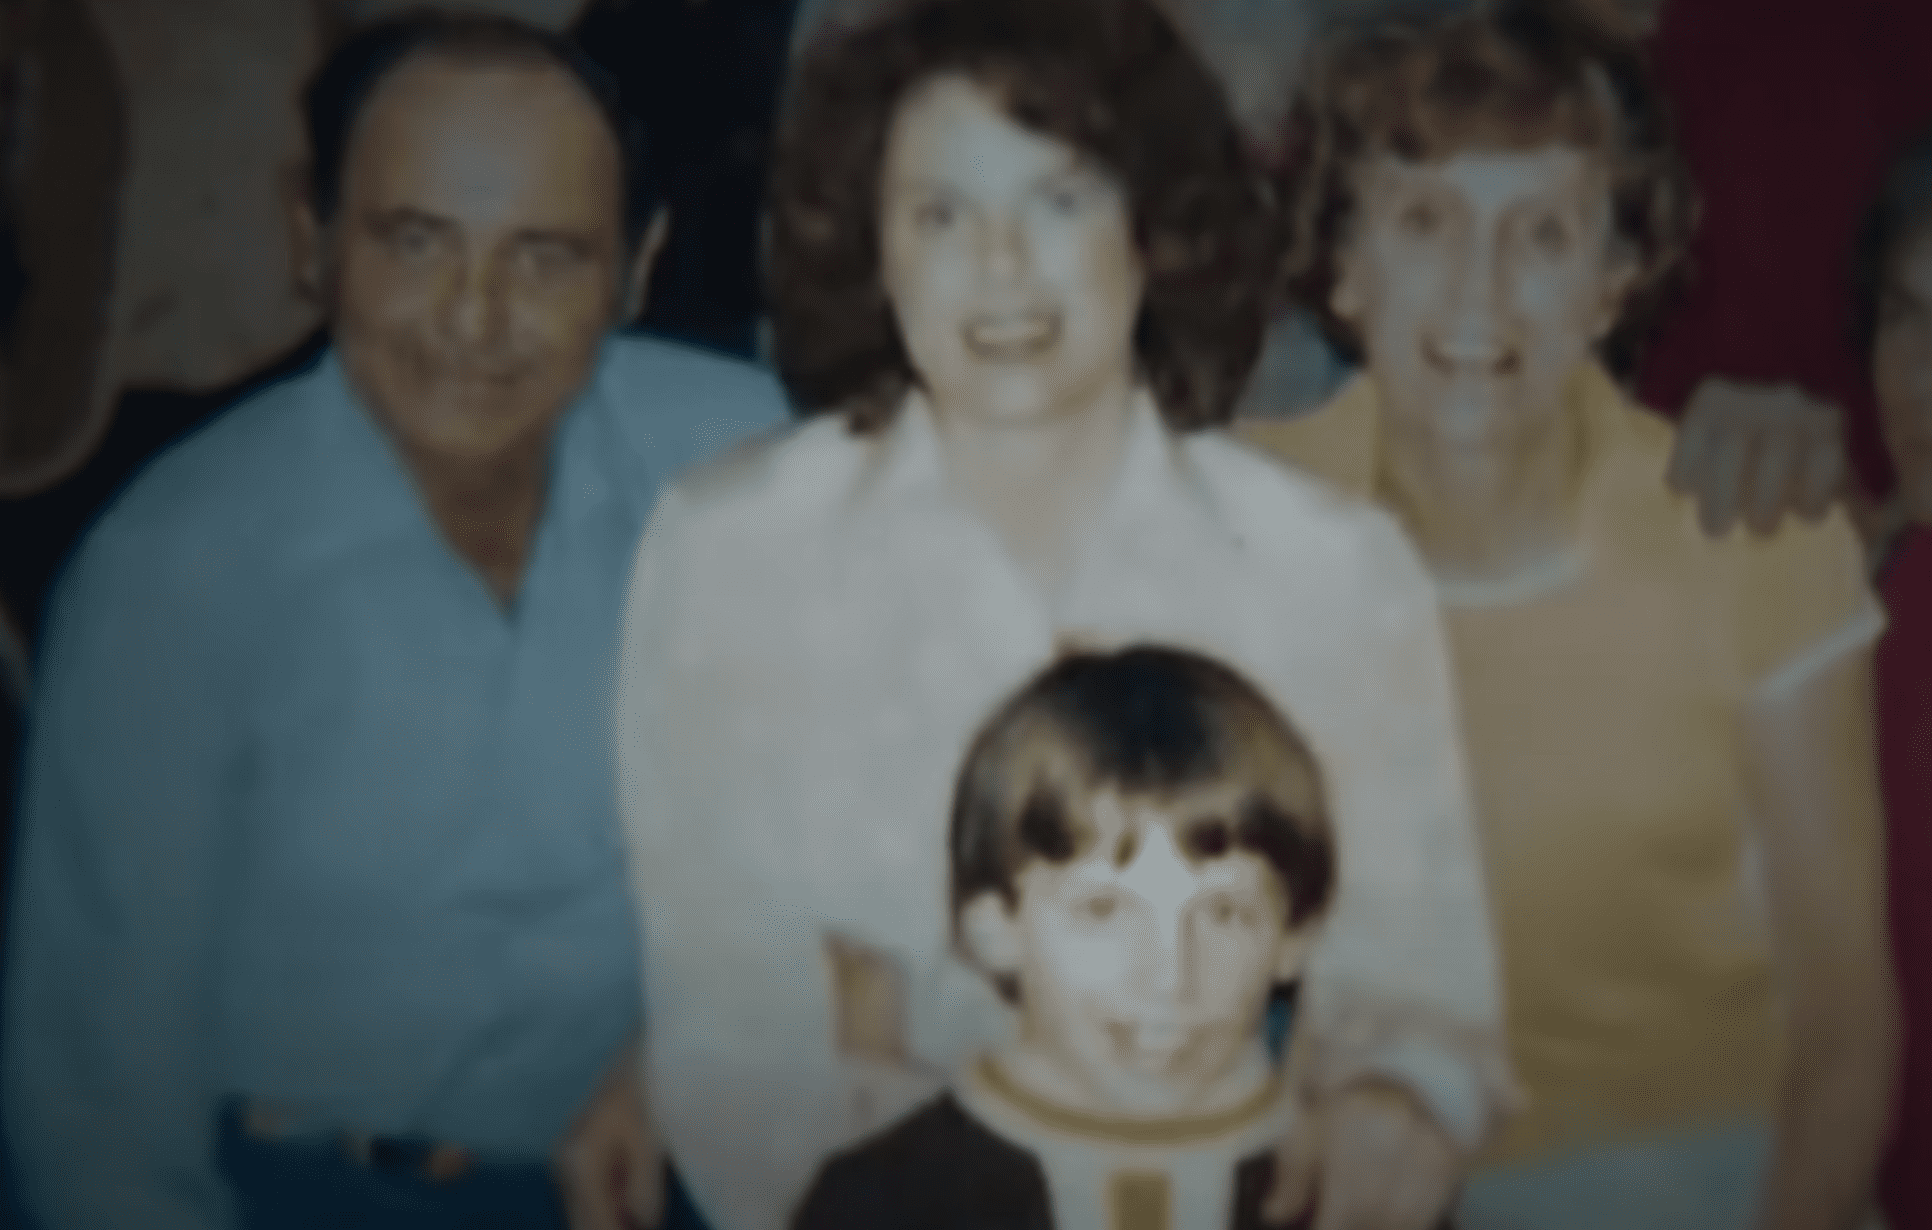 Steve Lickteig with the people he believed were his adoptive family. | Source: youtube.com/TODAY